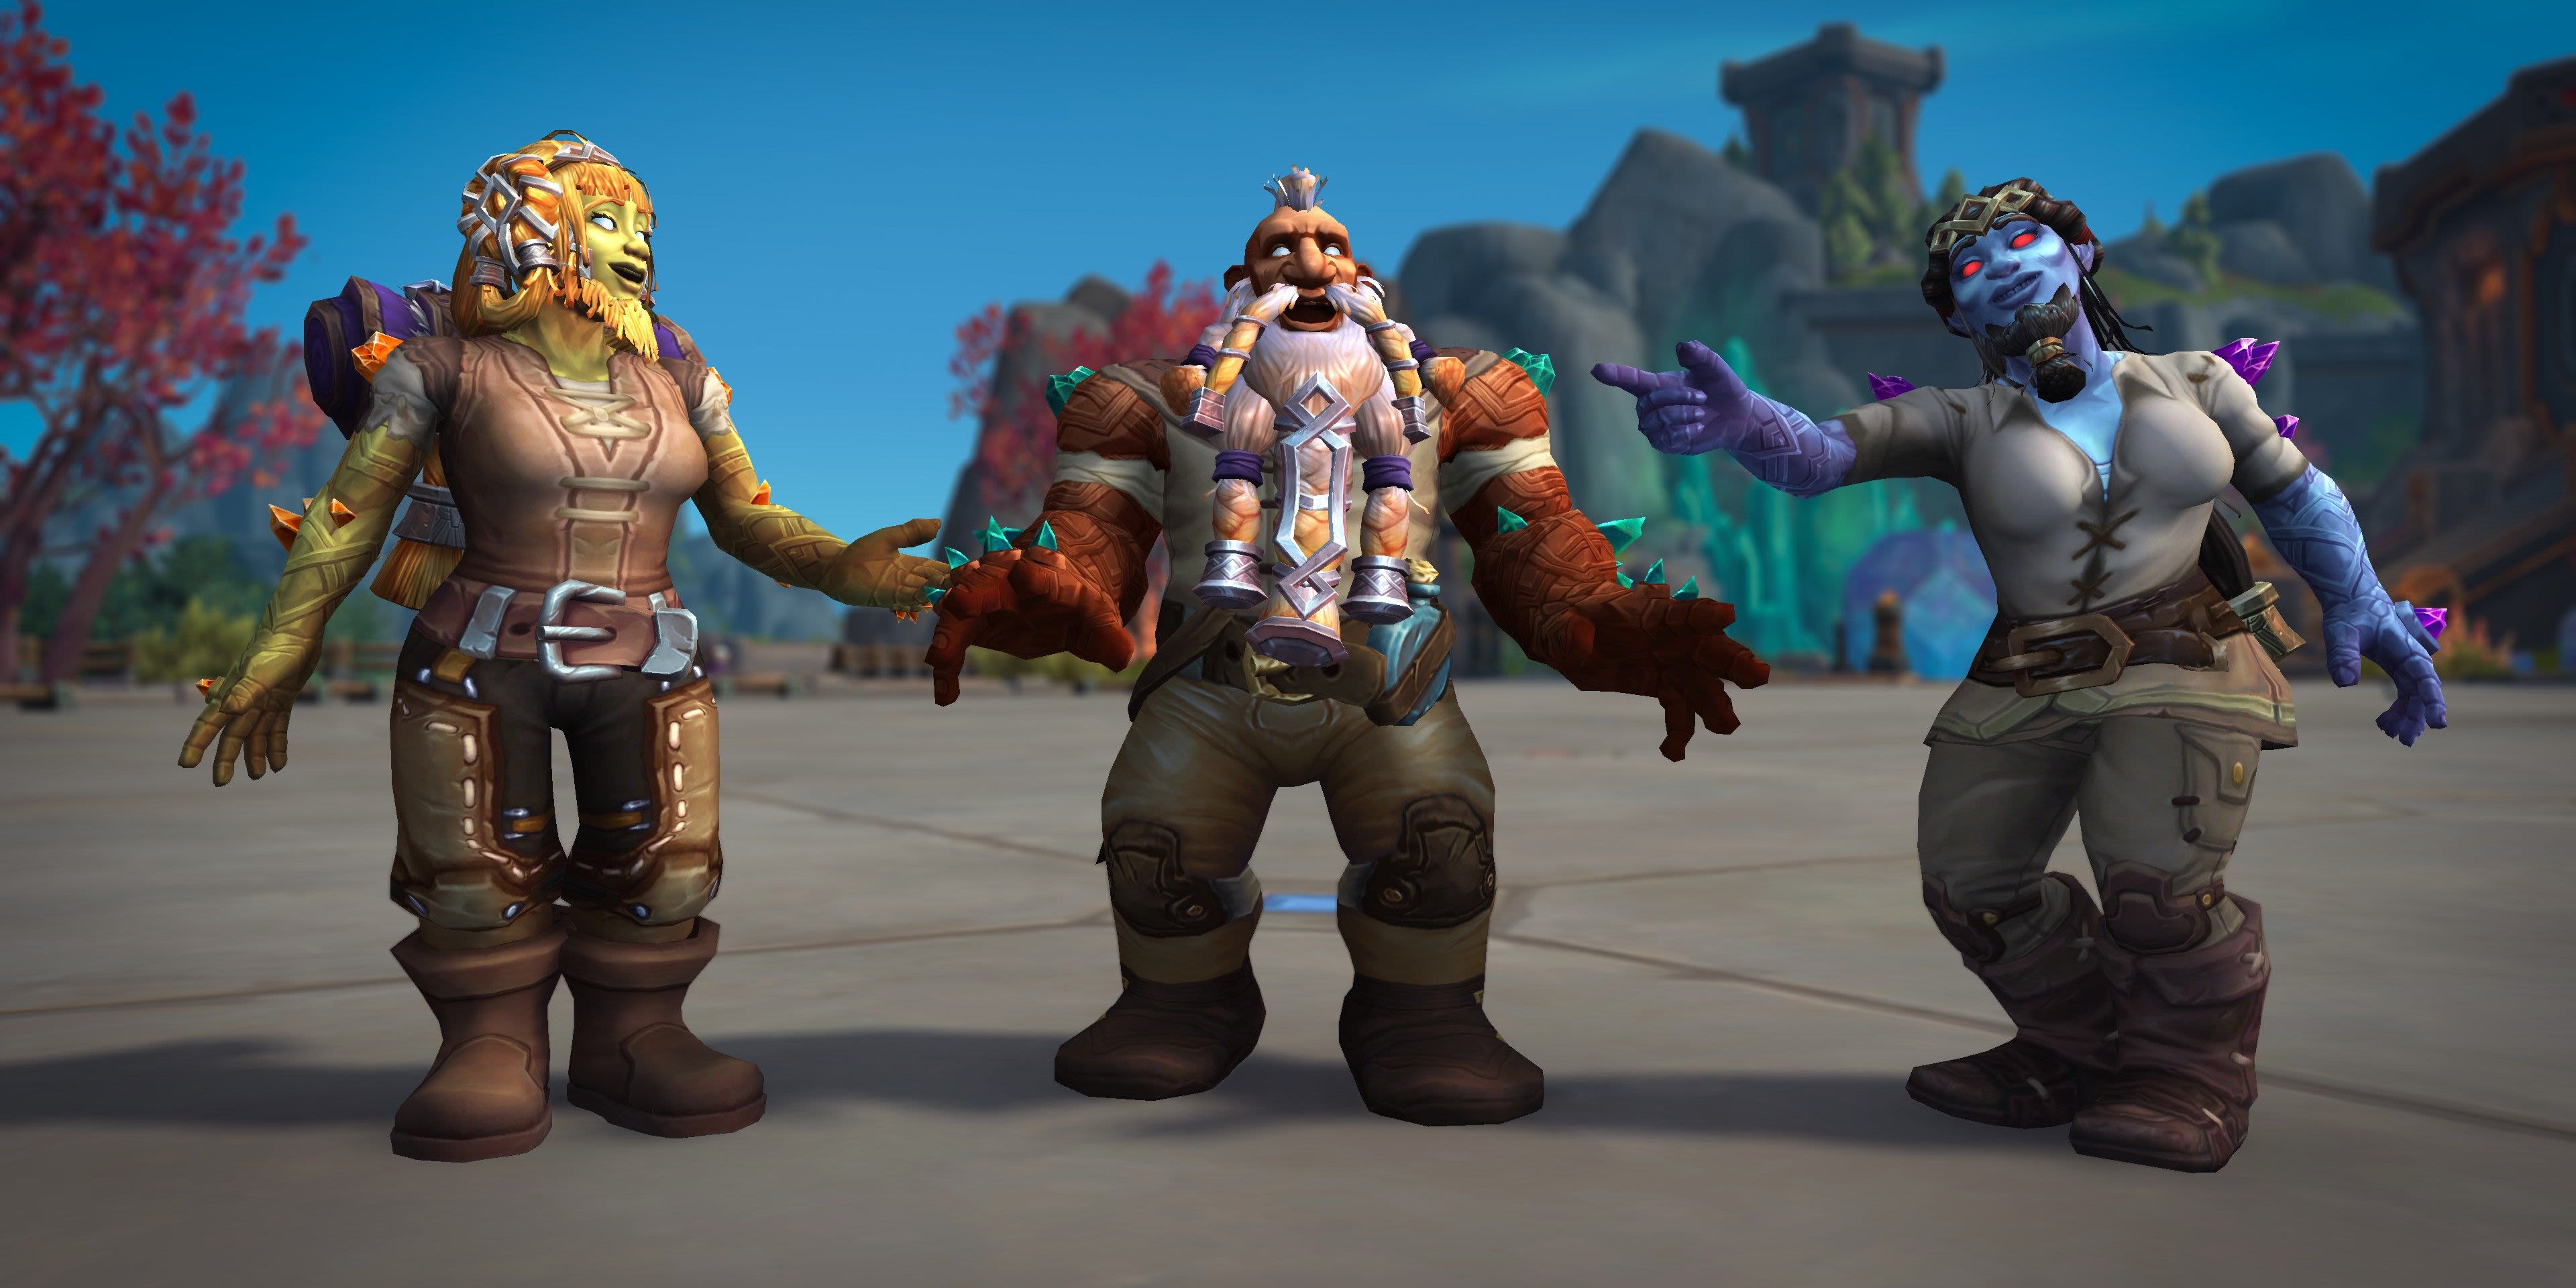 World of Warcraft Fans Notice a Big Difference Between Dwarves and Earthen